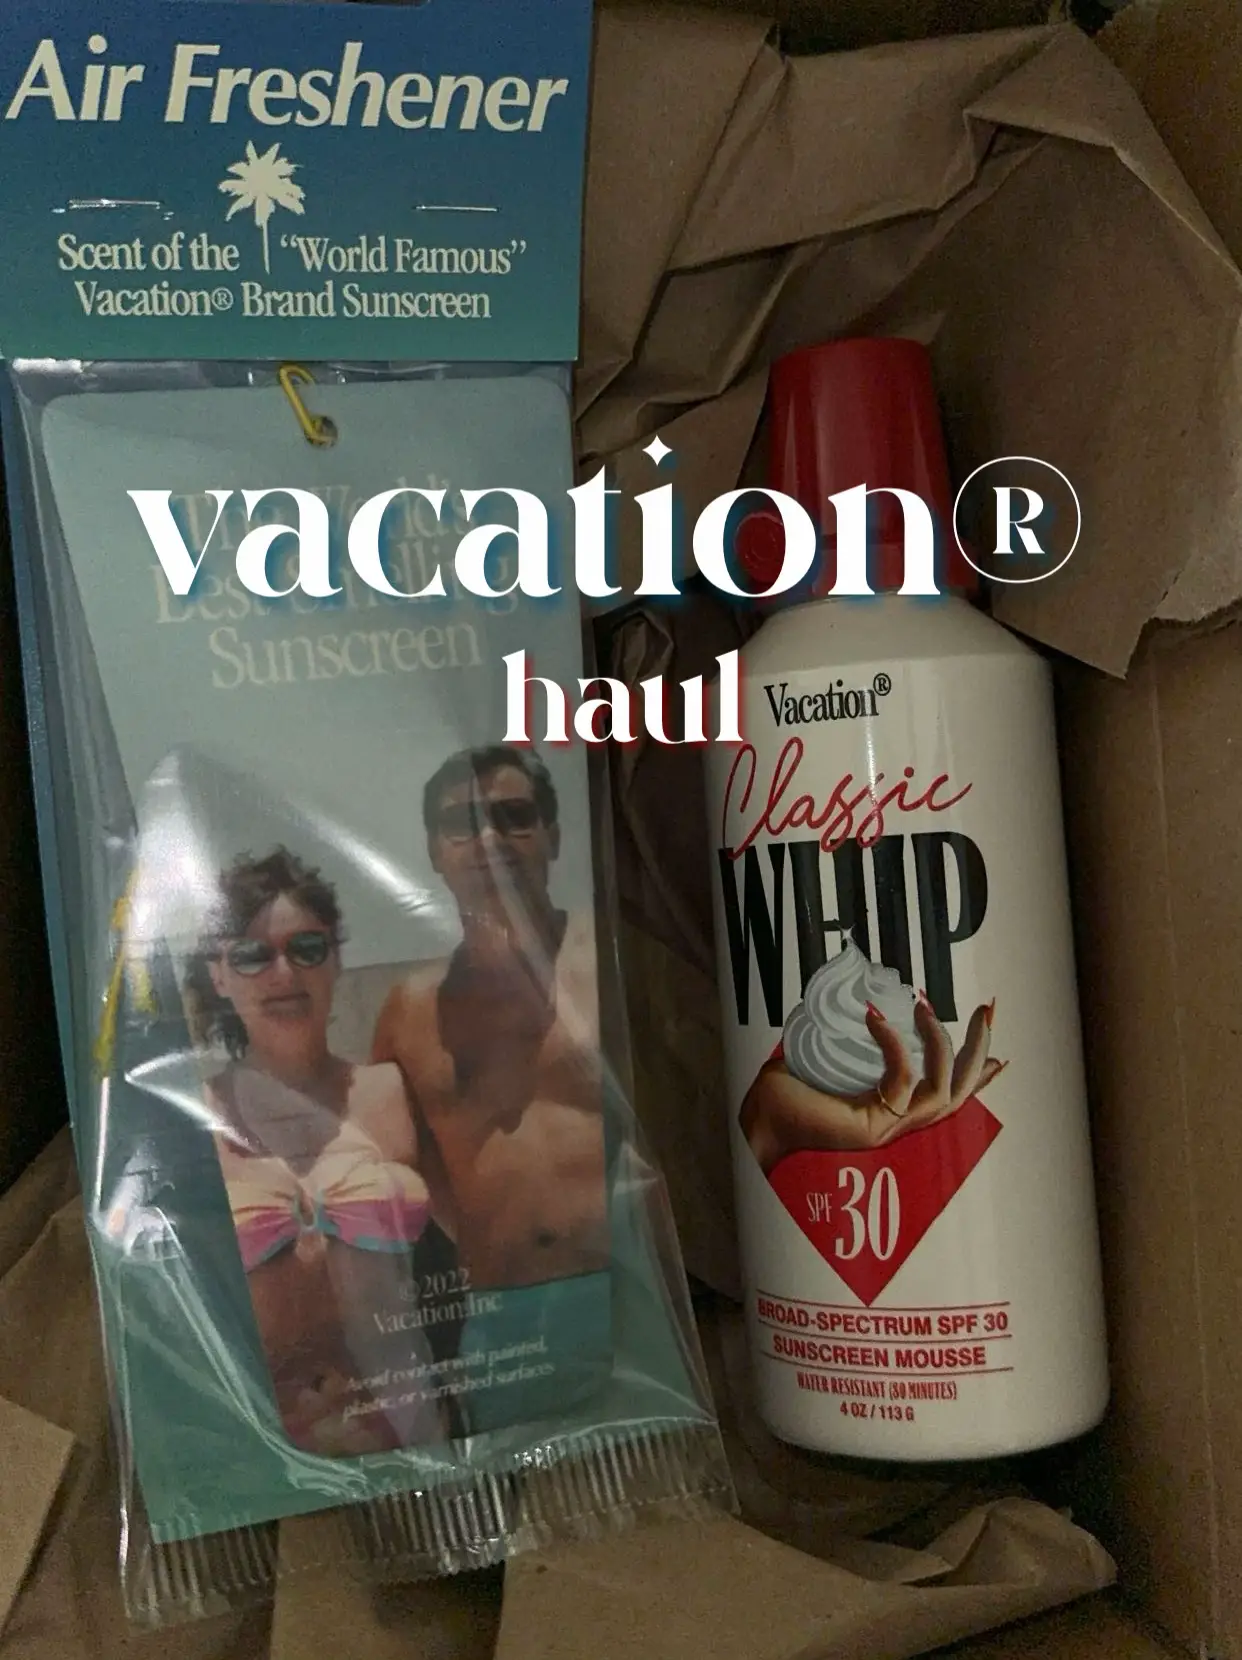 Vacation Classic Whip SPF 30 Sunscreen + Air Freshener Bundle, Whipped  Sunscreen Mousse SPF 30, Moisturizer with SPF, Broad Spectrum,  Water-Resistant